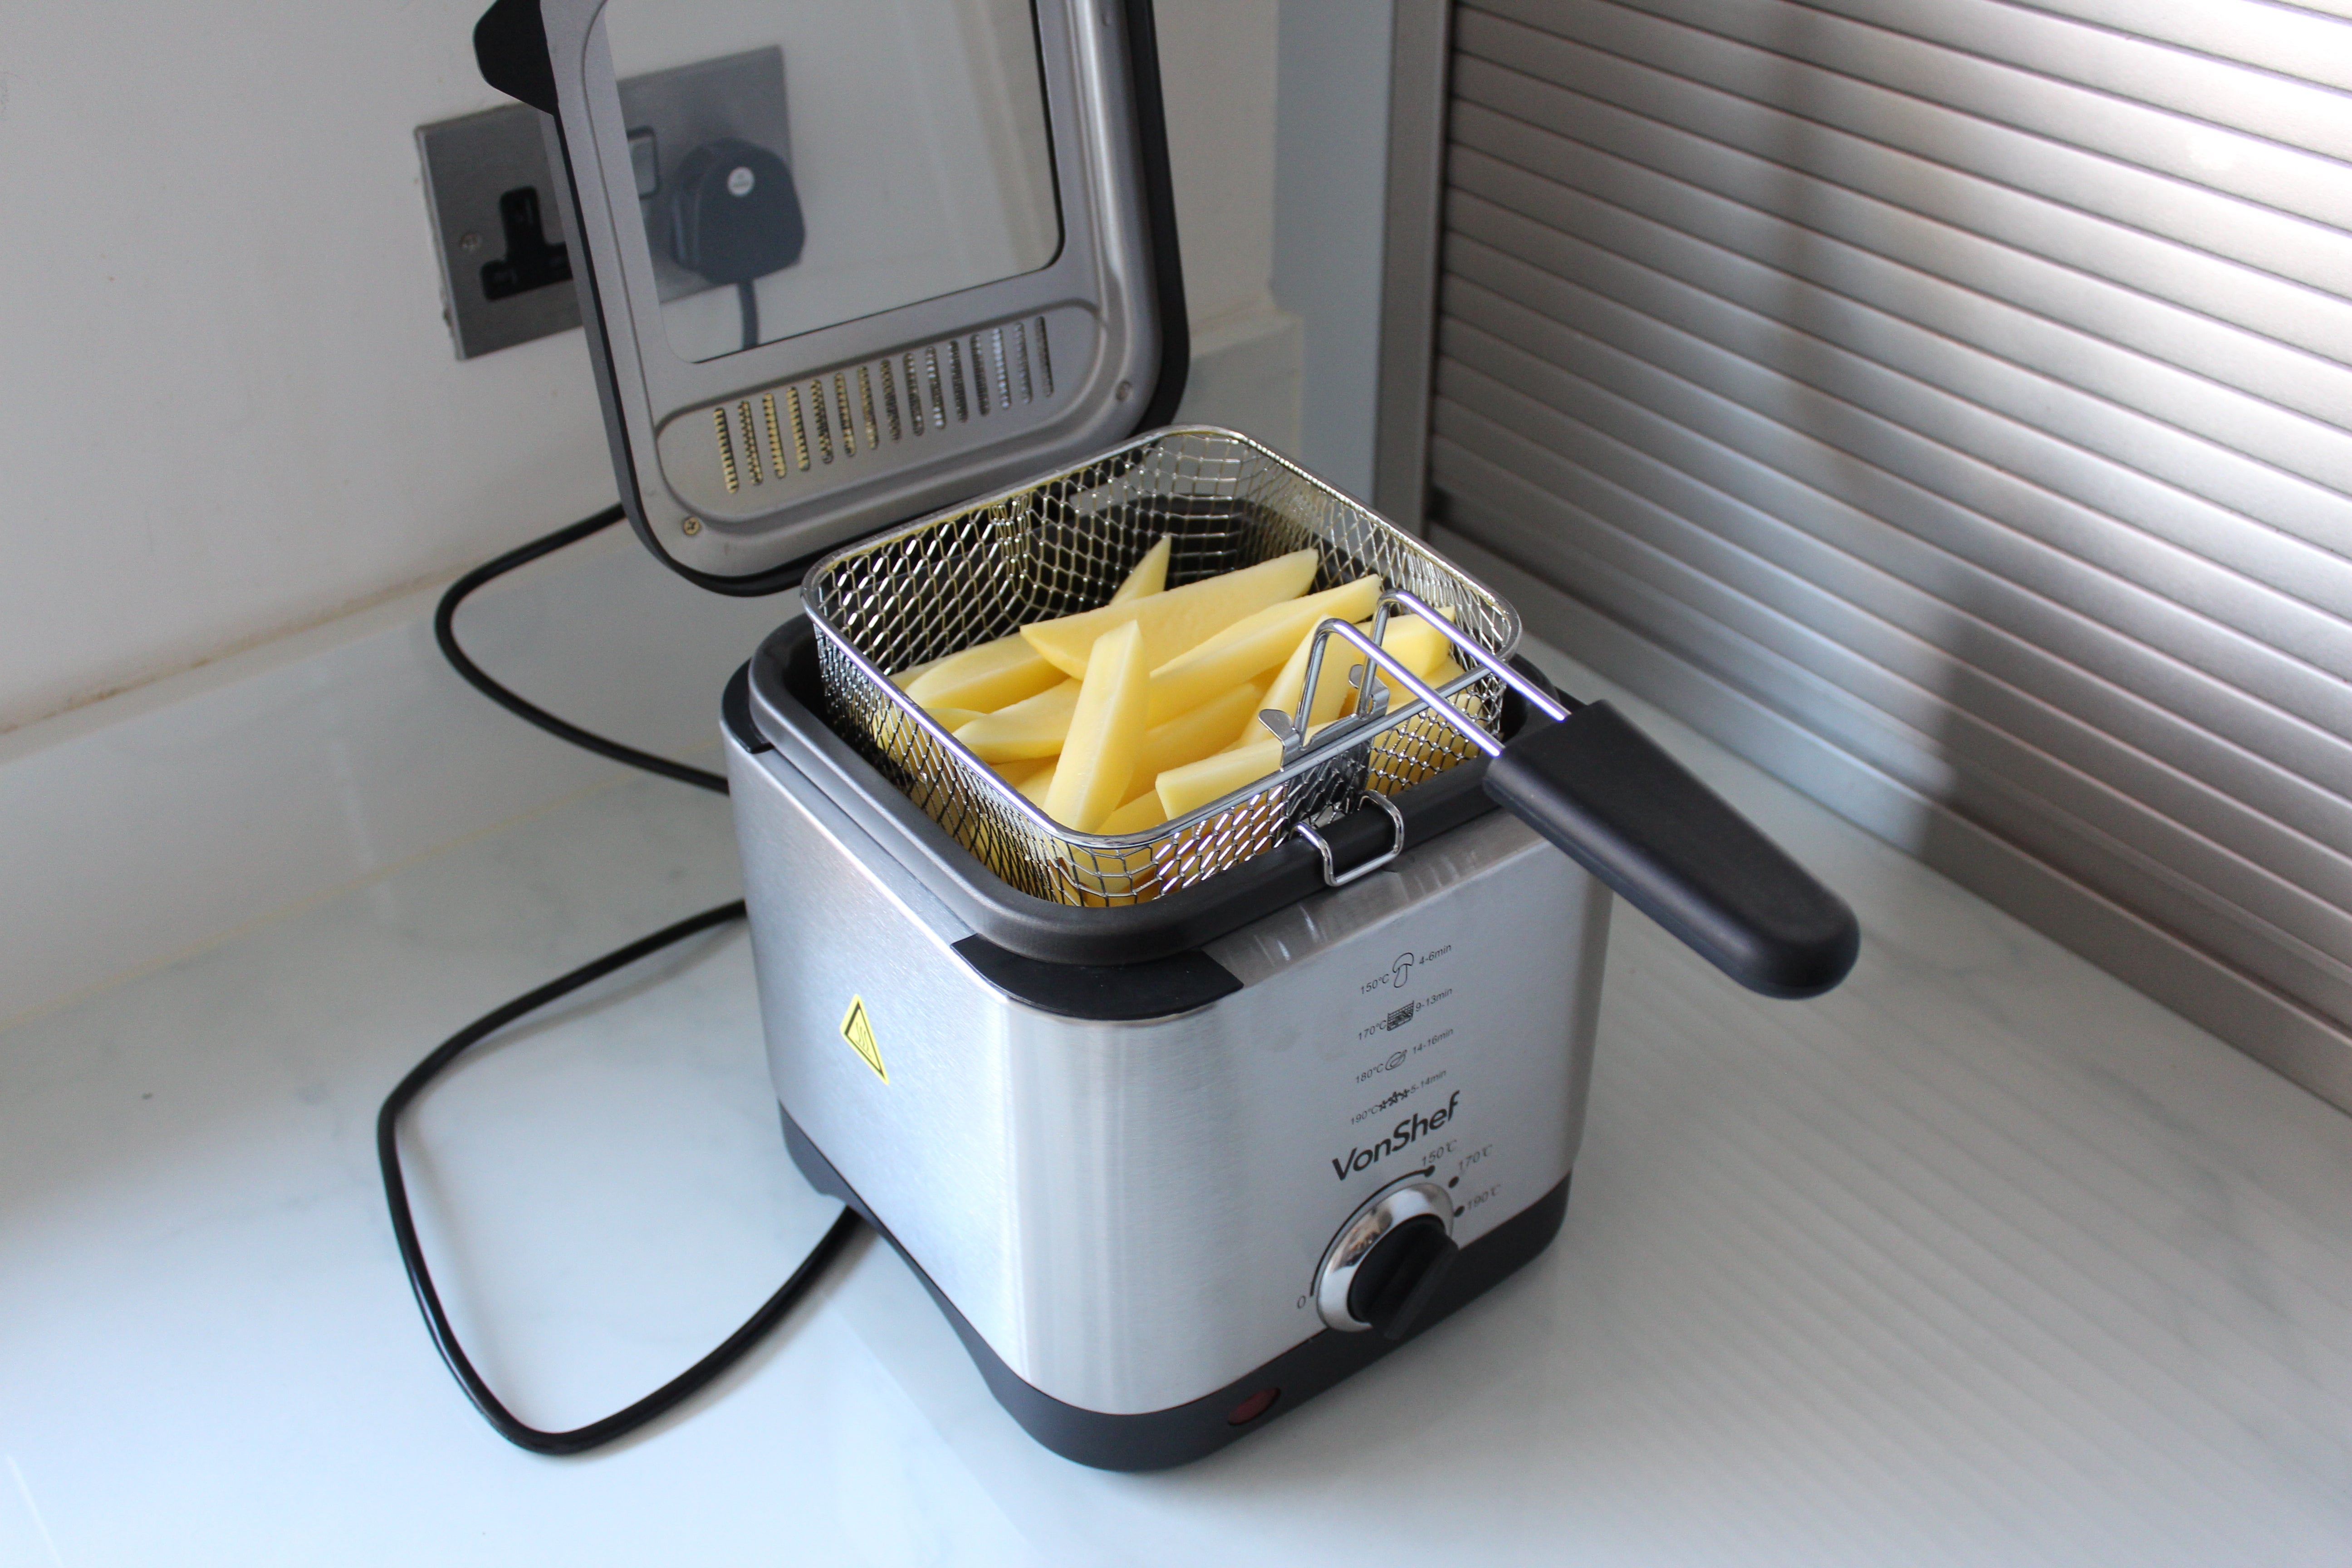 VonShef 1.5L Deep Fat Fryer on counterA silver-black VonShef deep fat fryer kept on a kitchen platform with raw French fries kept insideRight angled view of a silver-black VonShef deep fat fryer kept on white background with raw French fries kept insideA silver-black VonShef deep fat fryer kept on a white background